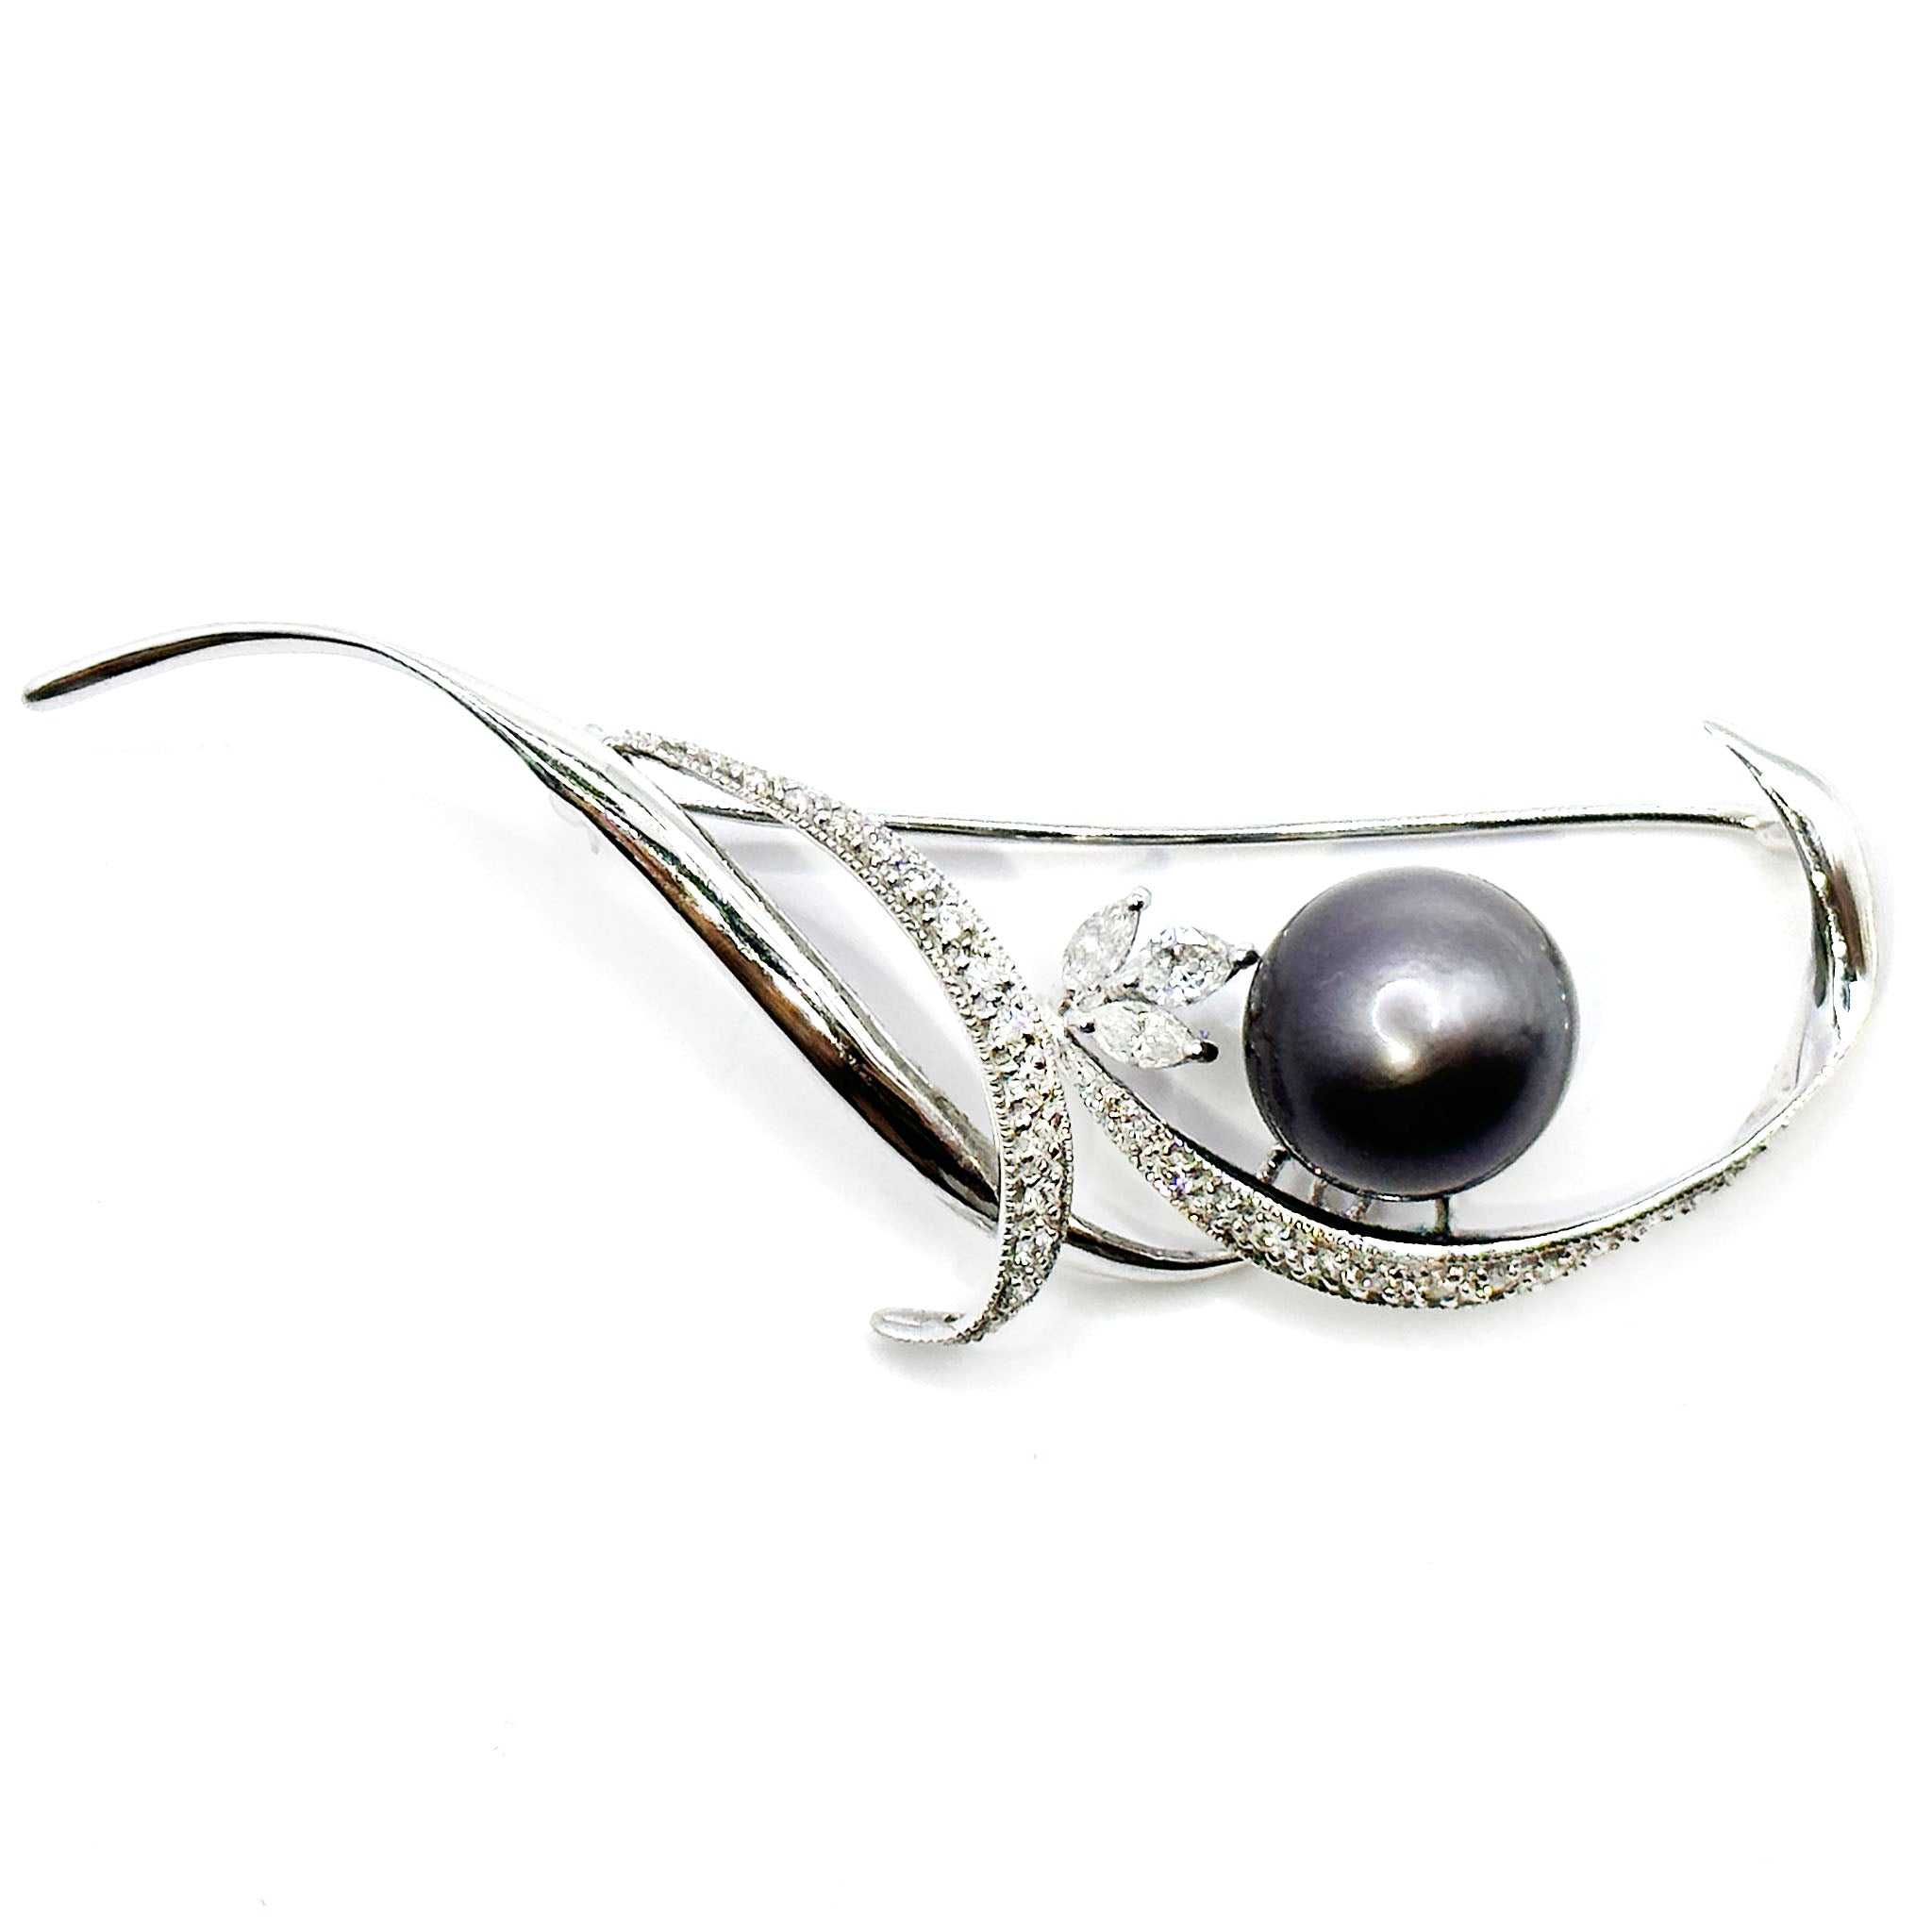 $7900 18Kt 12mm Black Tahitian Pearl and Diamonds White Gold Brooch Pin